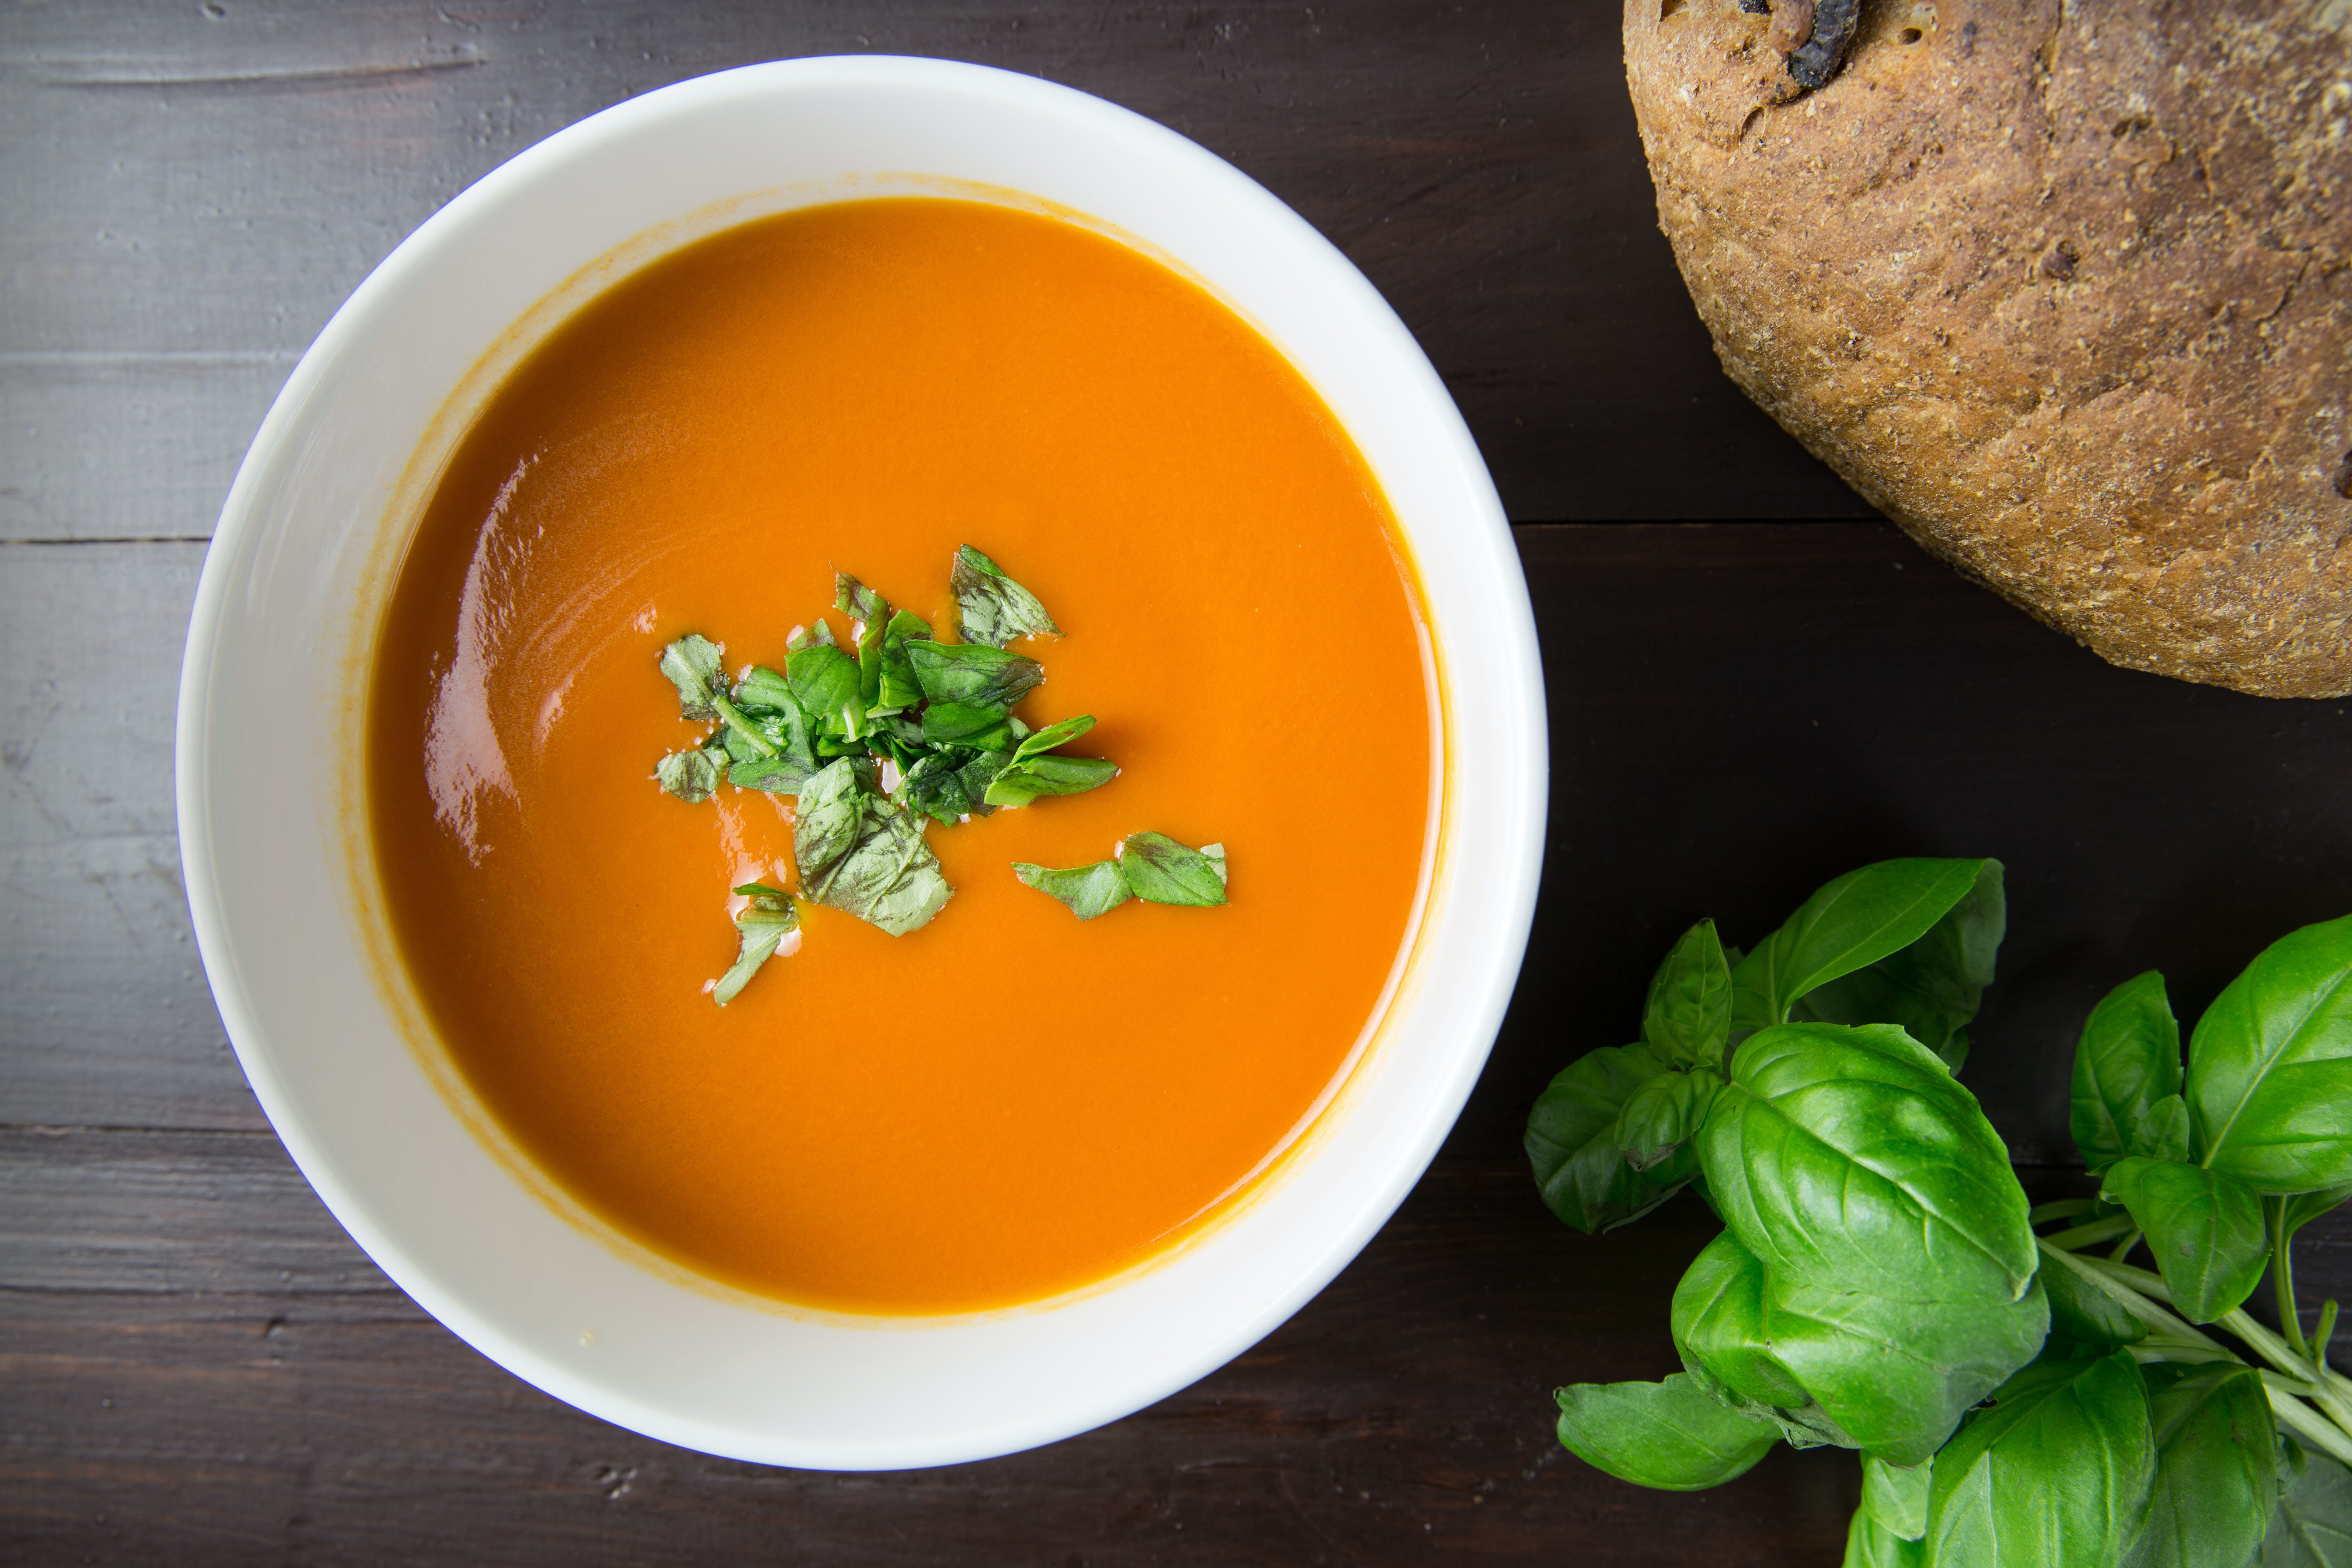 Brown soup  in a white ceramic bowl. | Source: Pexels